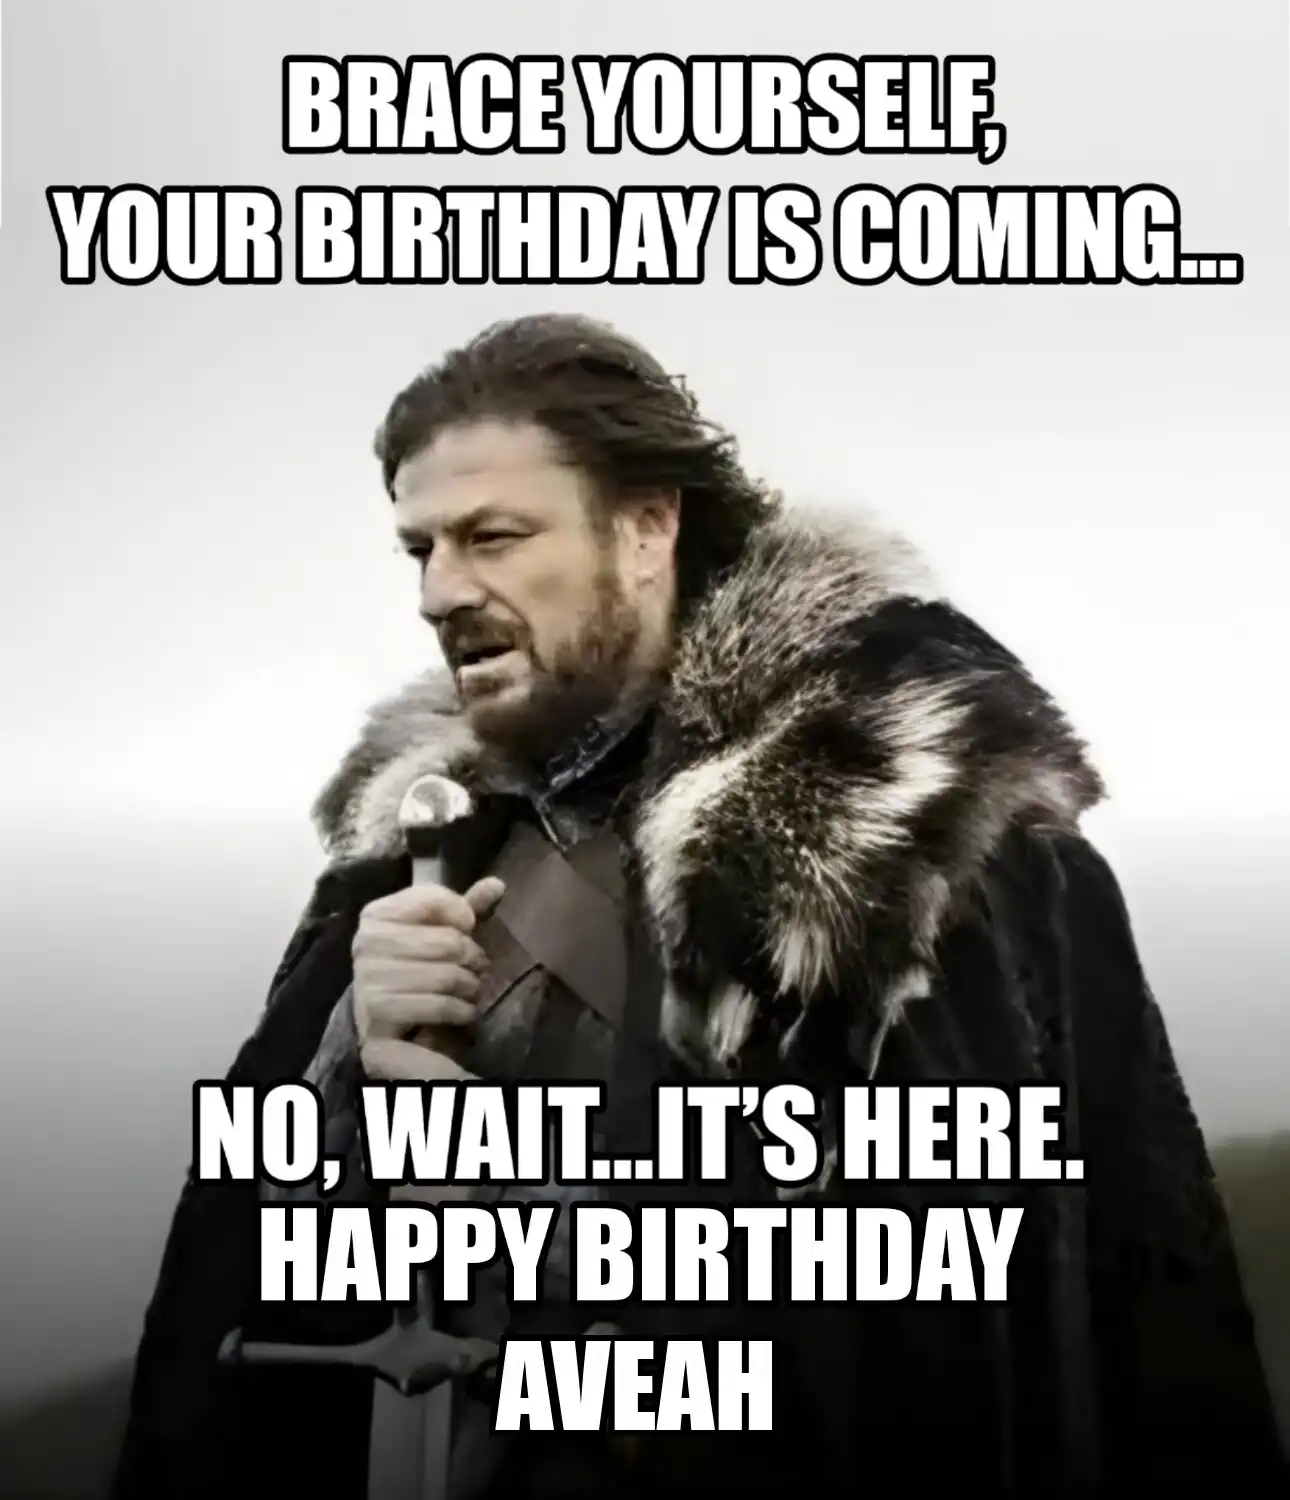 Happy Birthday Aveah Brace Yourself Your Birthday Is Coming Meme